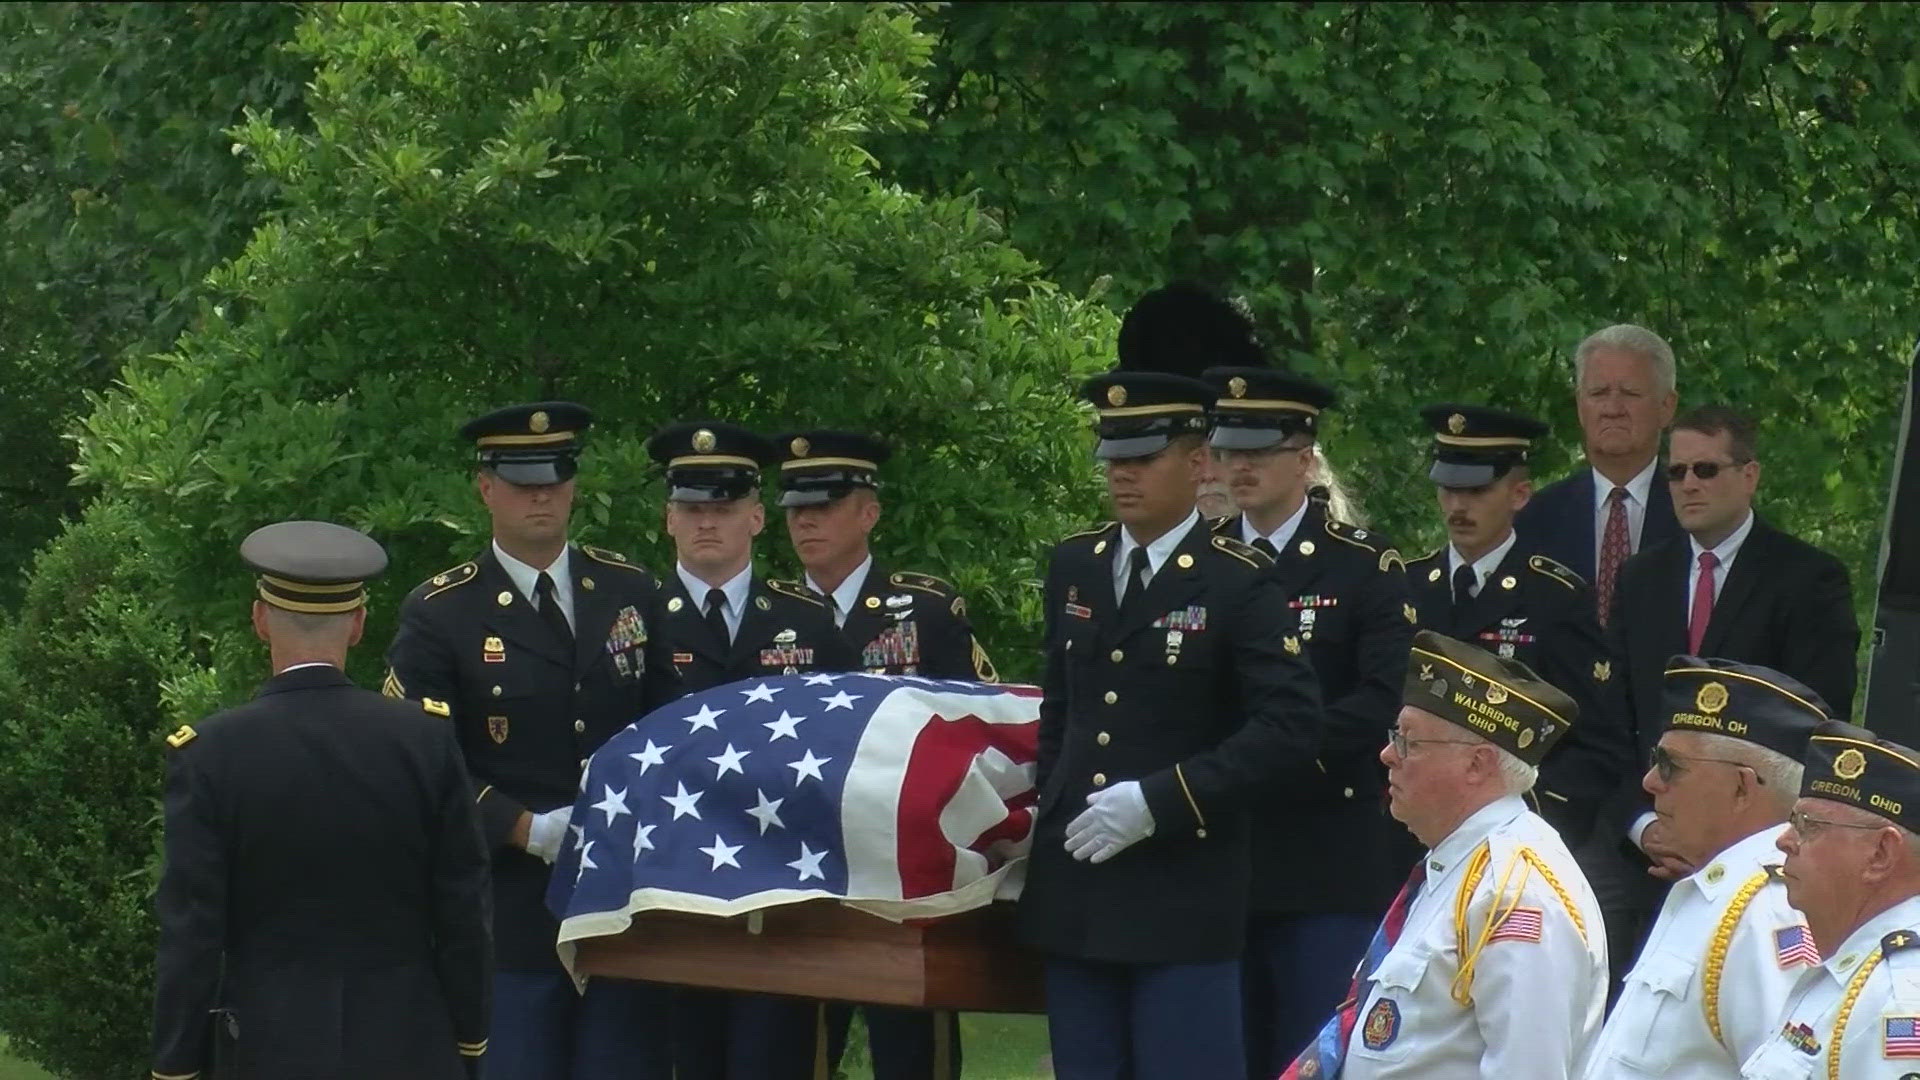 Oregon, Ohio native and WWII airman Jack Coy was laid to rest on Sunday, 80 years after his death.